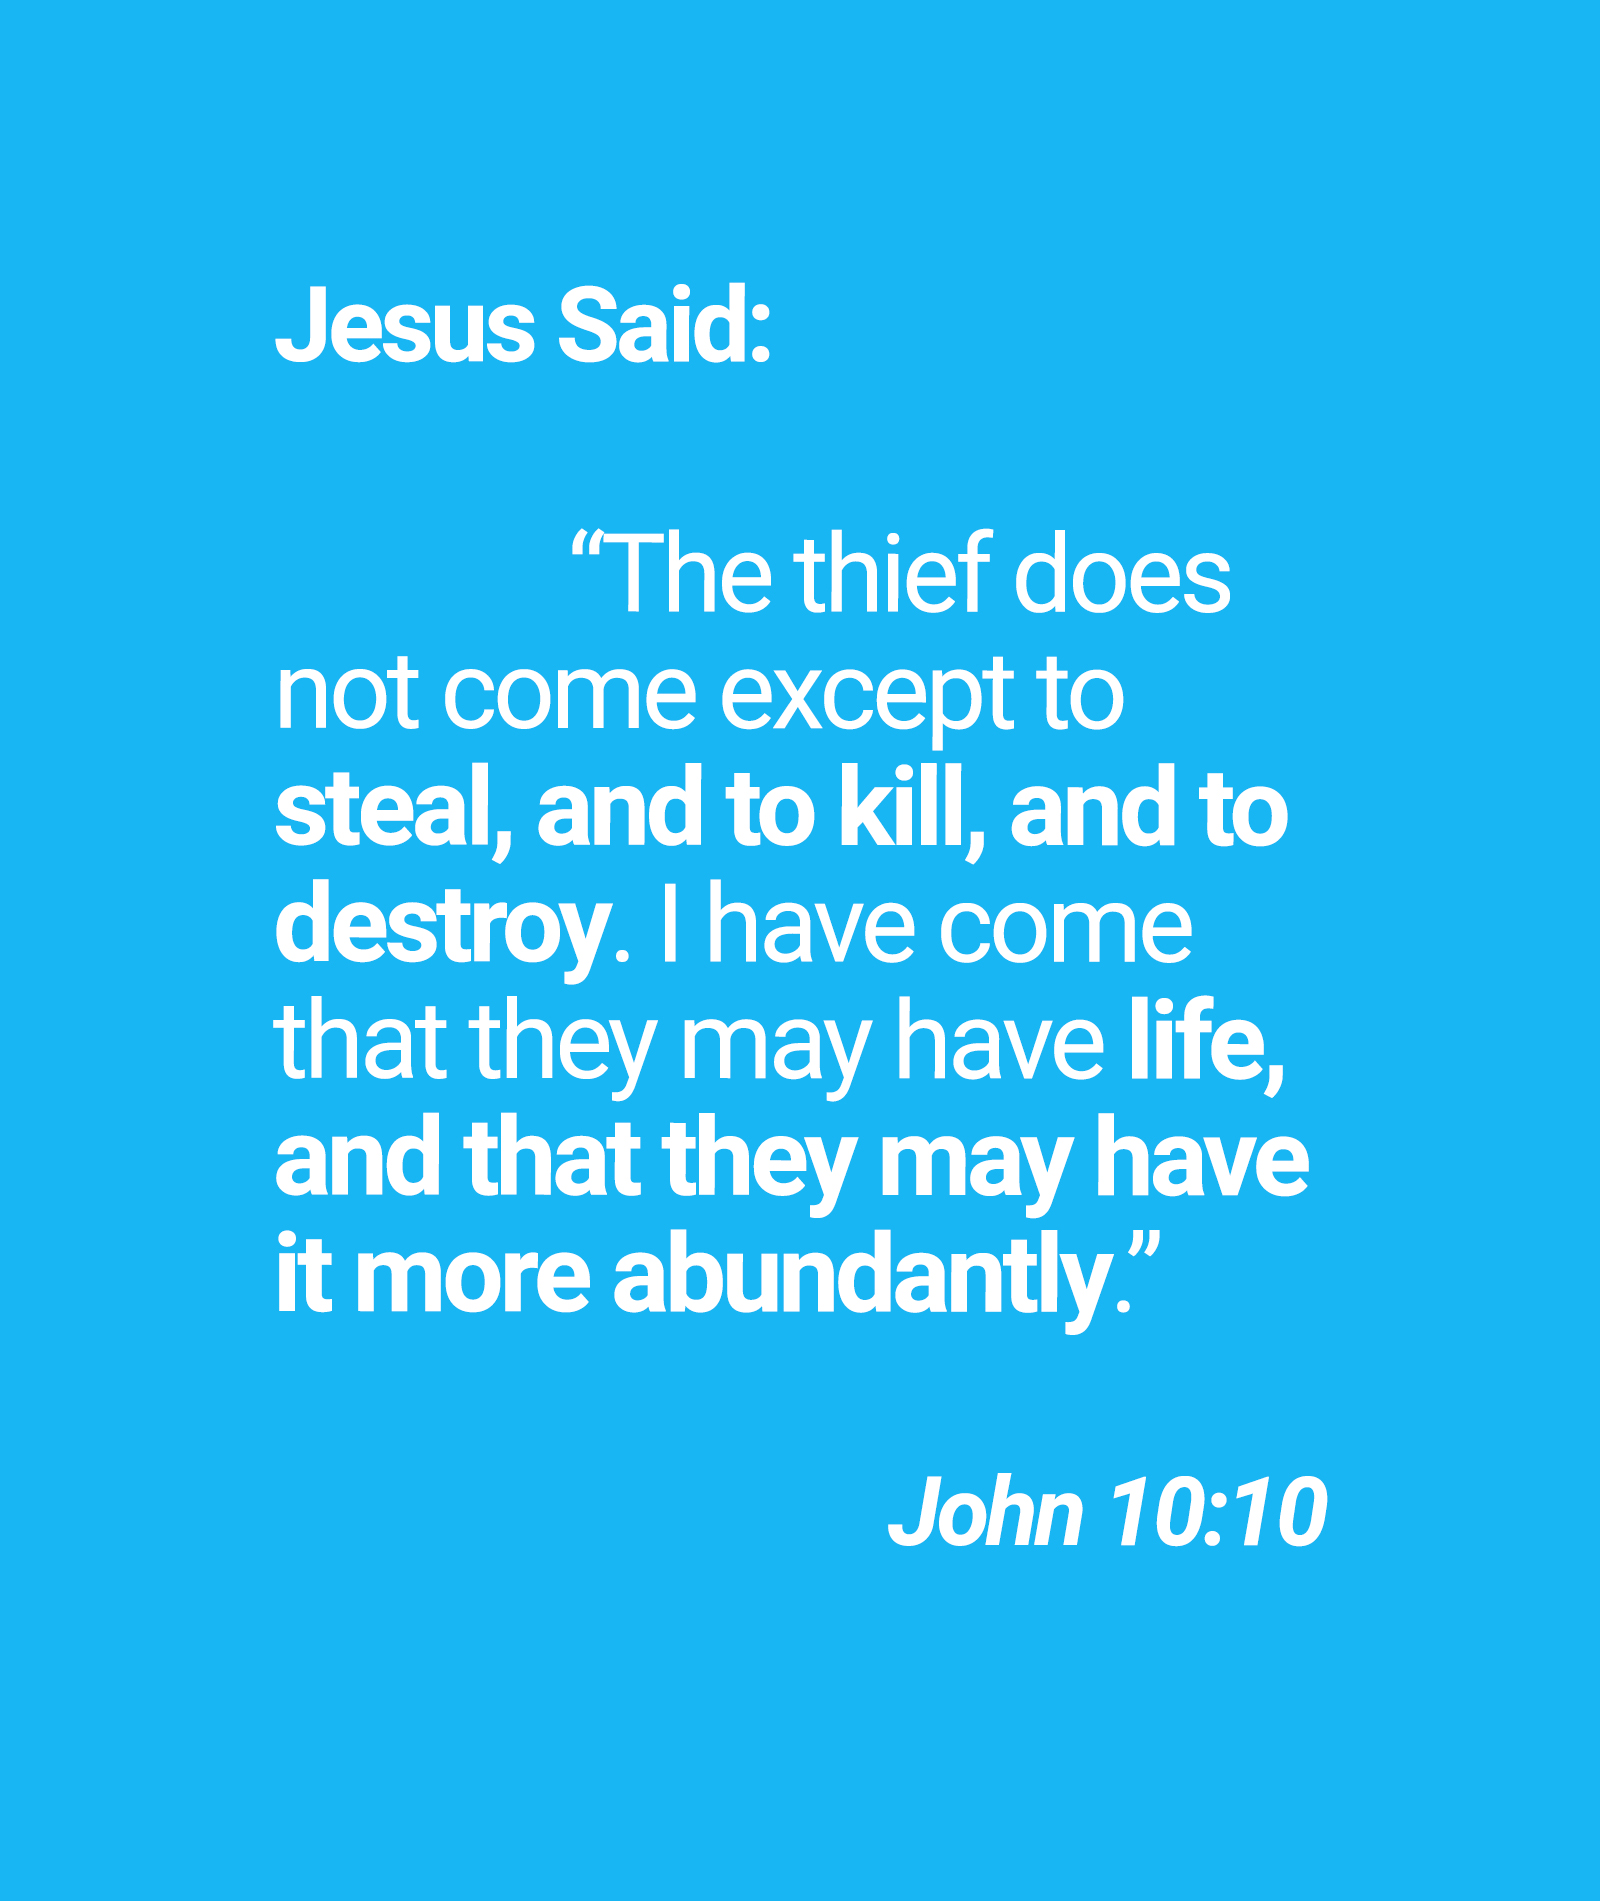 Jesus Said: "The thief does not come except to steal; and to kill, and to destroy: I have come that they may have life; and that may have it more abundantly" John 10:10 they